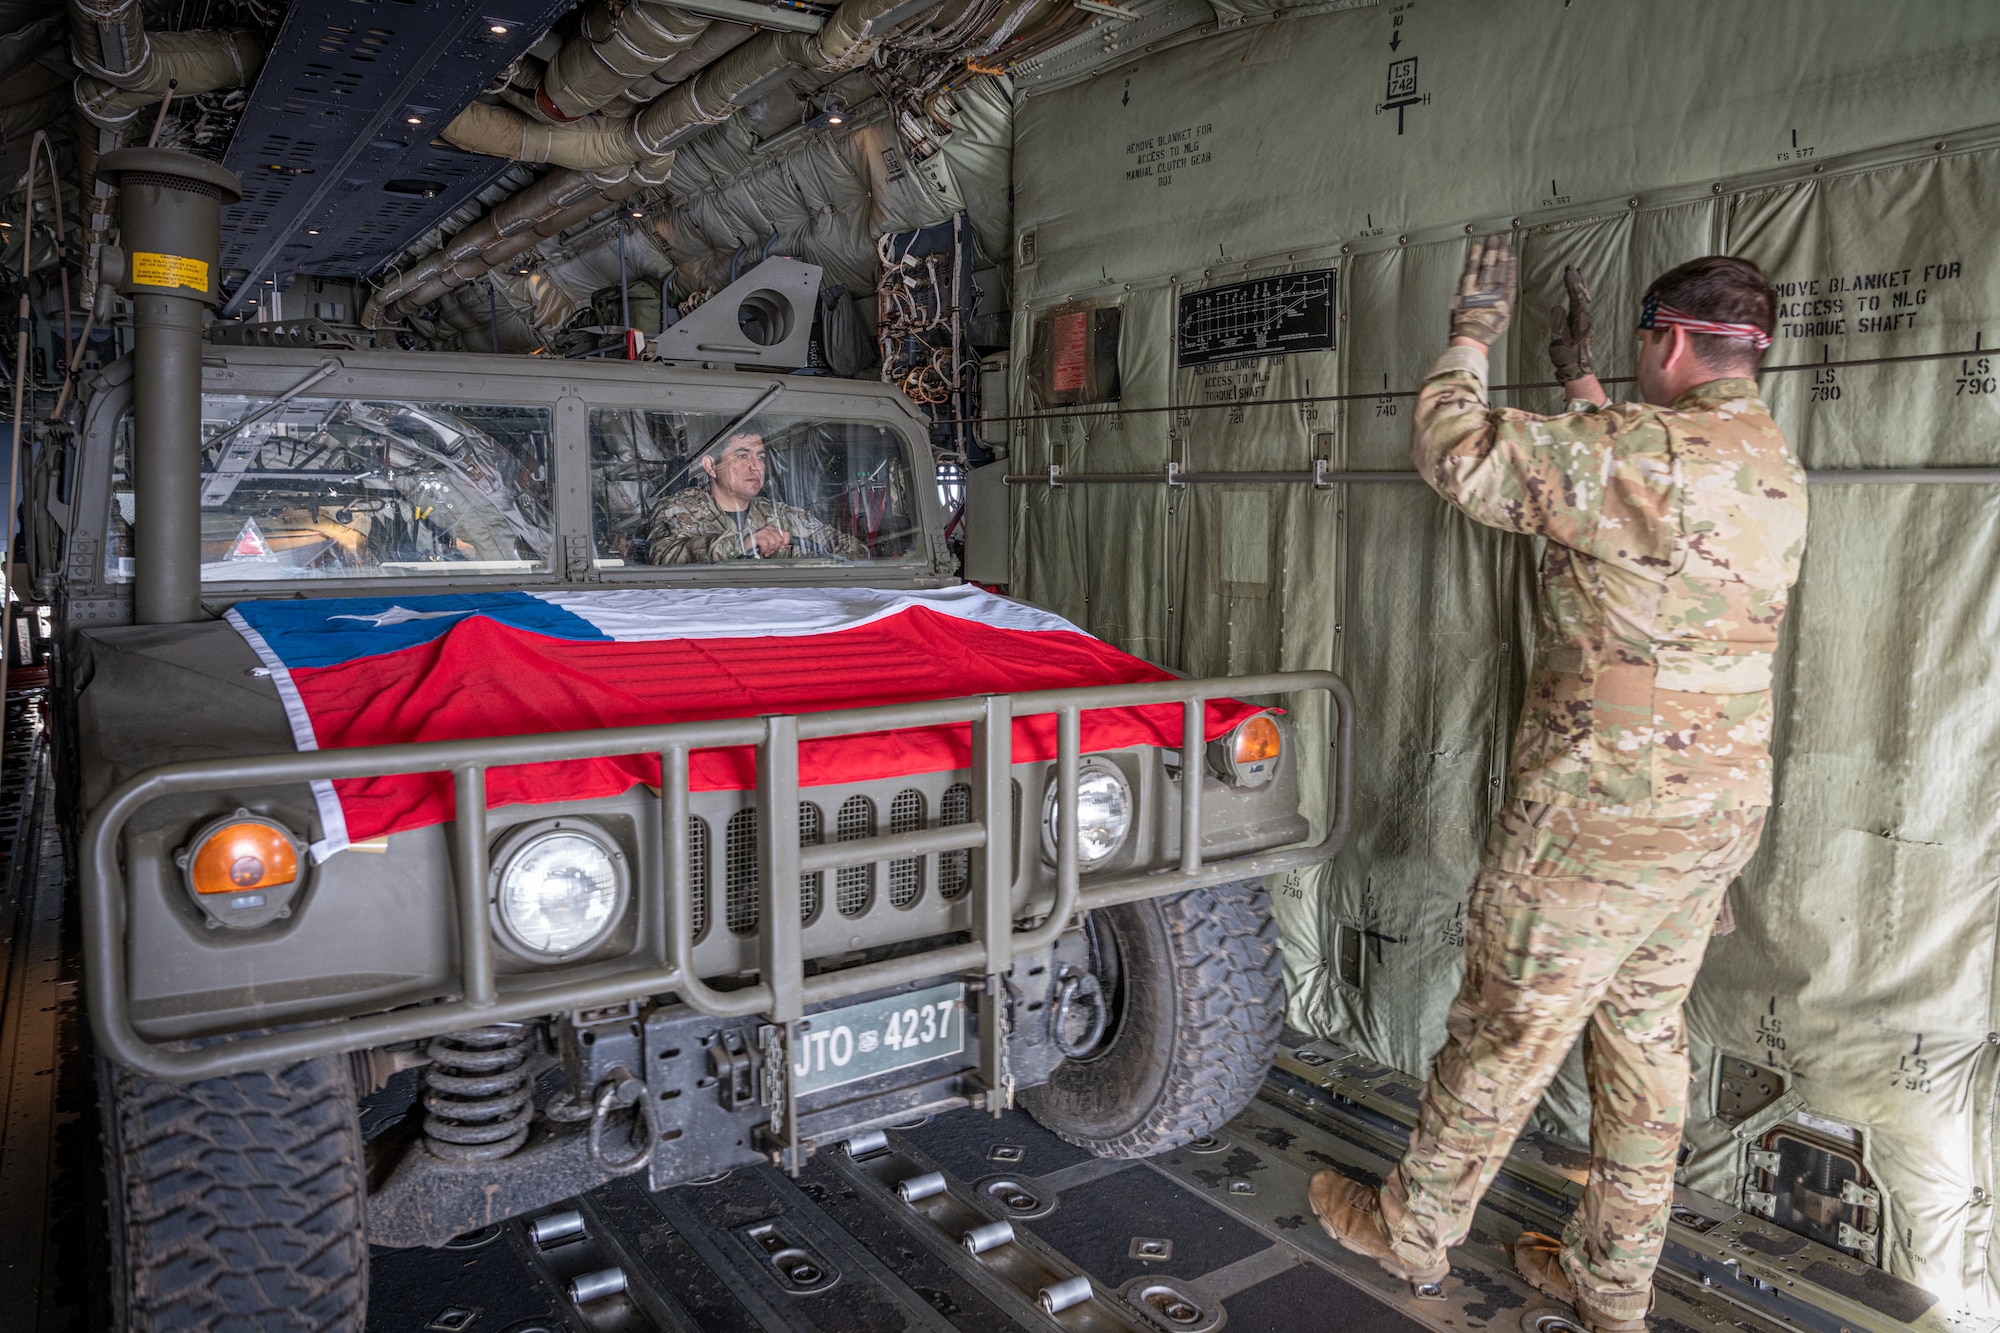 A Chilean Armed Forces Humvee is loaded onto a C-130J Super Hercules from the 39th Airlift Squadron out of the 317th Airlift Wing, Dyess AFB, TX on a runway at the Santiago de Chile Airport, Santiago, Chile, July 28, 2023, during exercise Southern Star 23. Exercise Southern Star 23 is a Chilean-led full-scale Special Operations, Joint, and Combined Employment Exercise. The training consists of staff planning, tactical maneuvers, and collaboration among SOUTHCOM components’ staff, Chilean Armed Forces, and interagency partners during a stabilization scenario which facilitates the opportunity for participants to execute and assess the staff’s ability to plan, coordinate and execute command and control, logistical support, and decision-making processes in a crisis scenario. (U.S. Air Force photo by Staff Sgt. Clayton Wear)